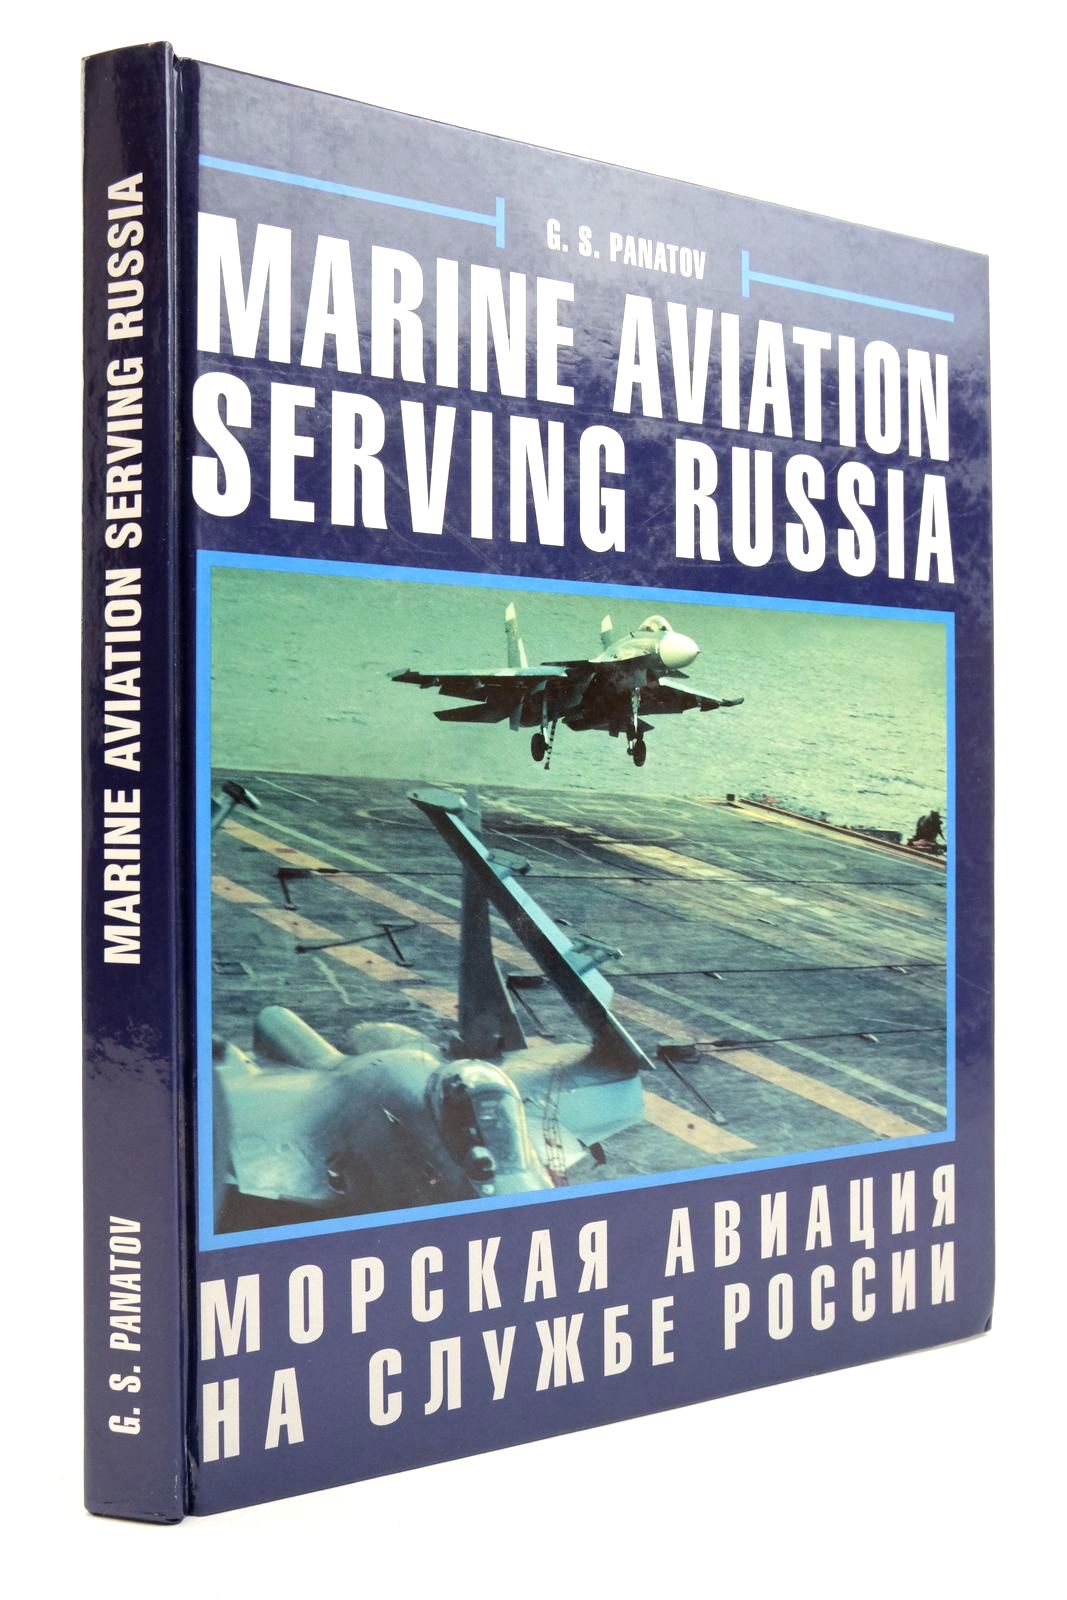 Photo of MARINE AVIATION SERVING RUSSIA written by Panatov, G.S. (STOCK CODE: 2138659)  for sale by Stella & Rose's Books